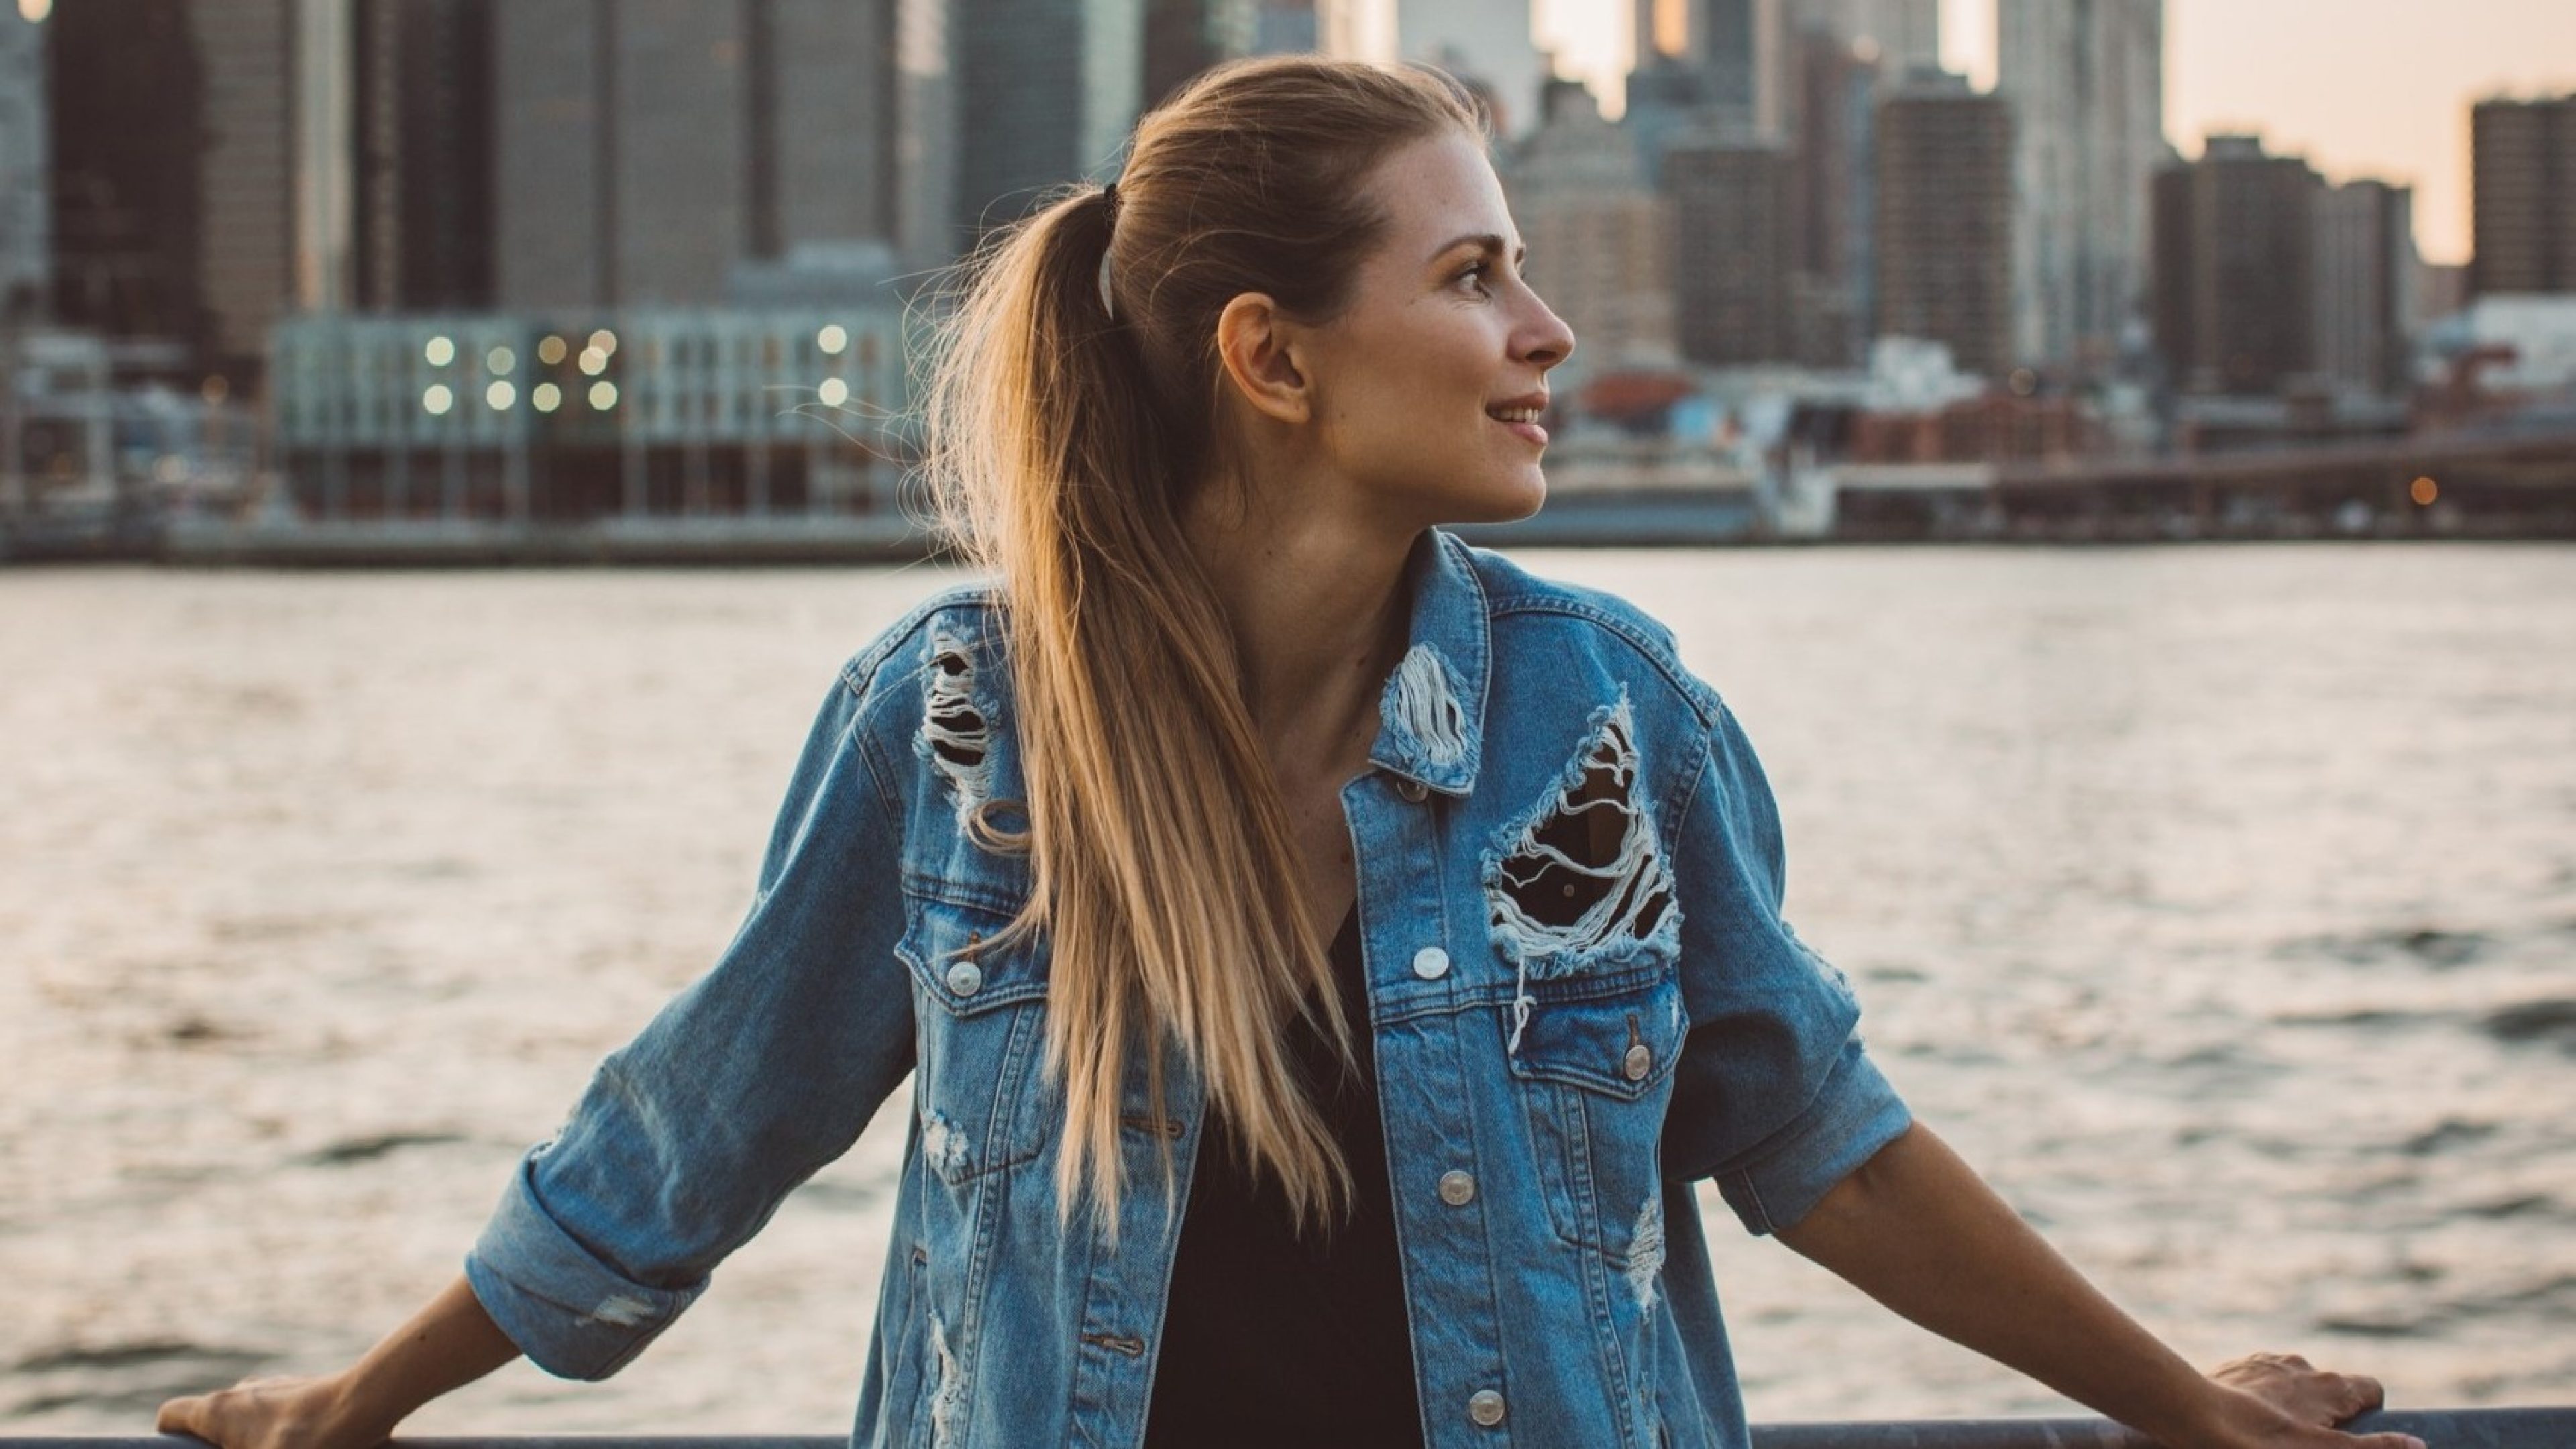 A young woman with long blonde hair and a torn denim jacket stands next to a railing by the water, with a cityscape in the background. She looks to the side with a smile as the sun goes down.